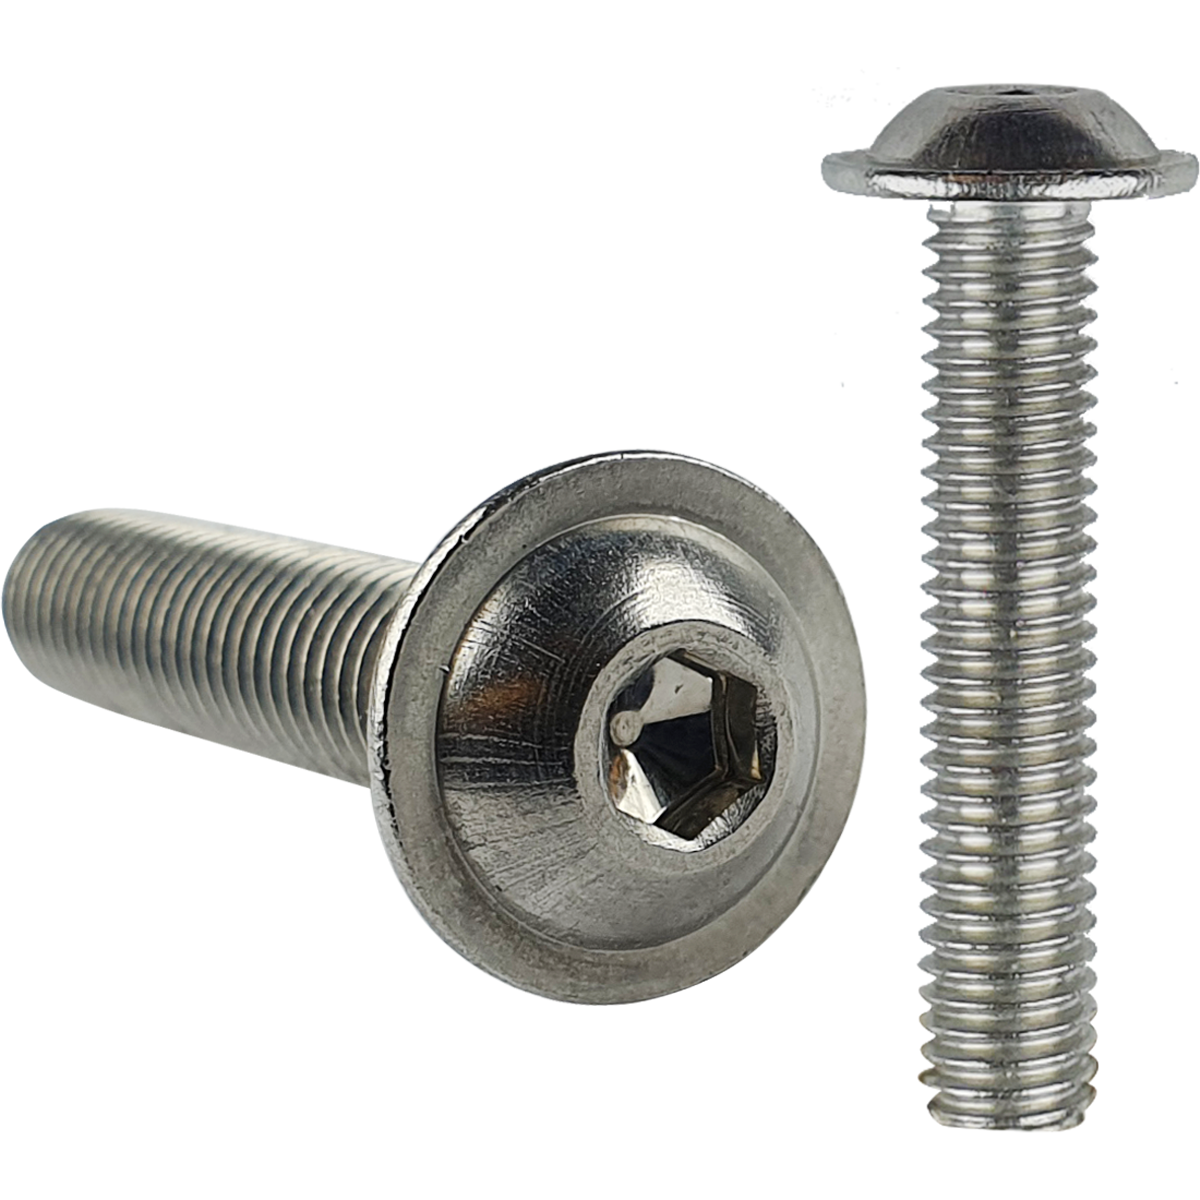 Corrosion resistant A2 stainless steel flanged button head socket machine screws in various sizes.